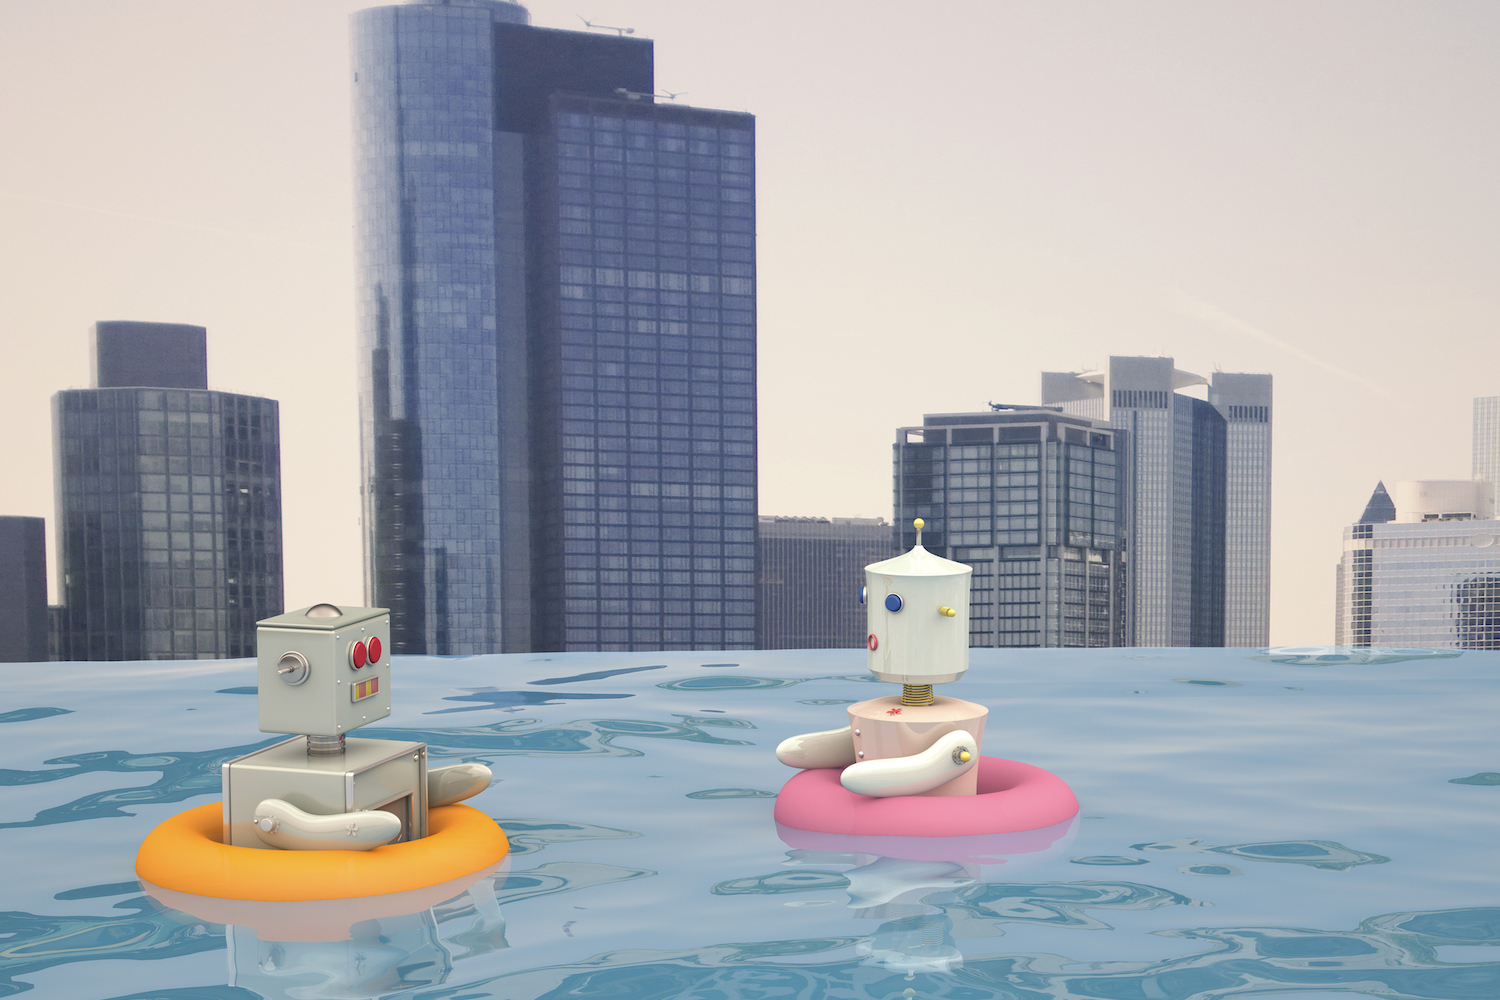 Male and female robots with floating tires swimming in swimming pool in front of city skyline, 3D rendering